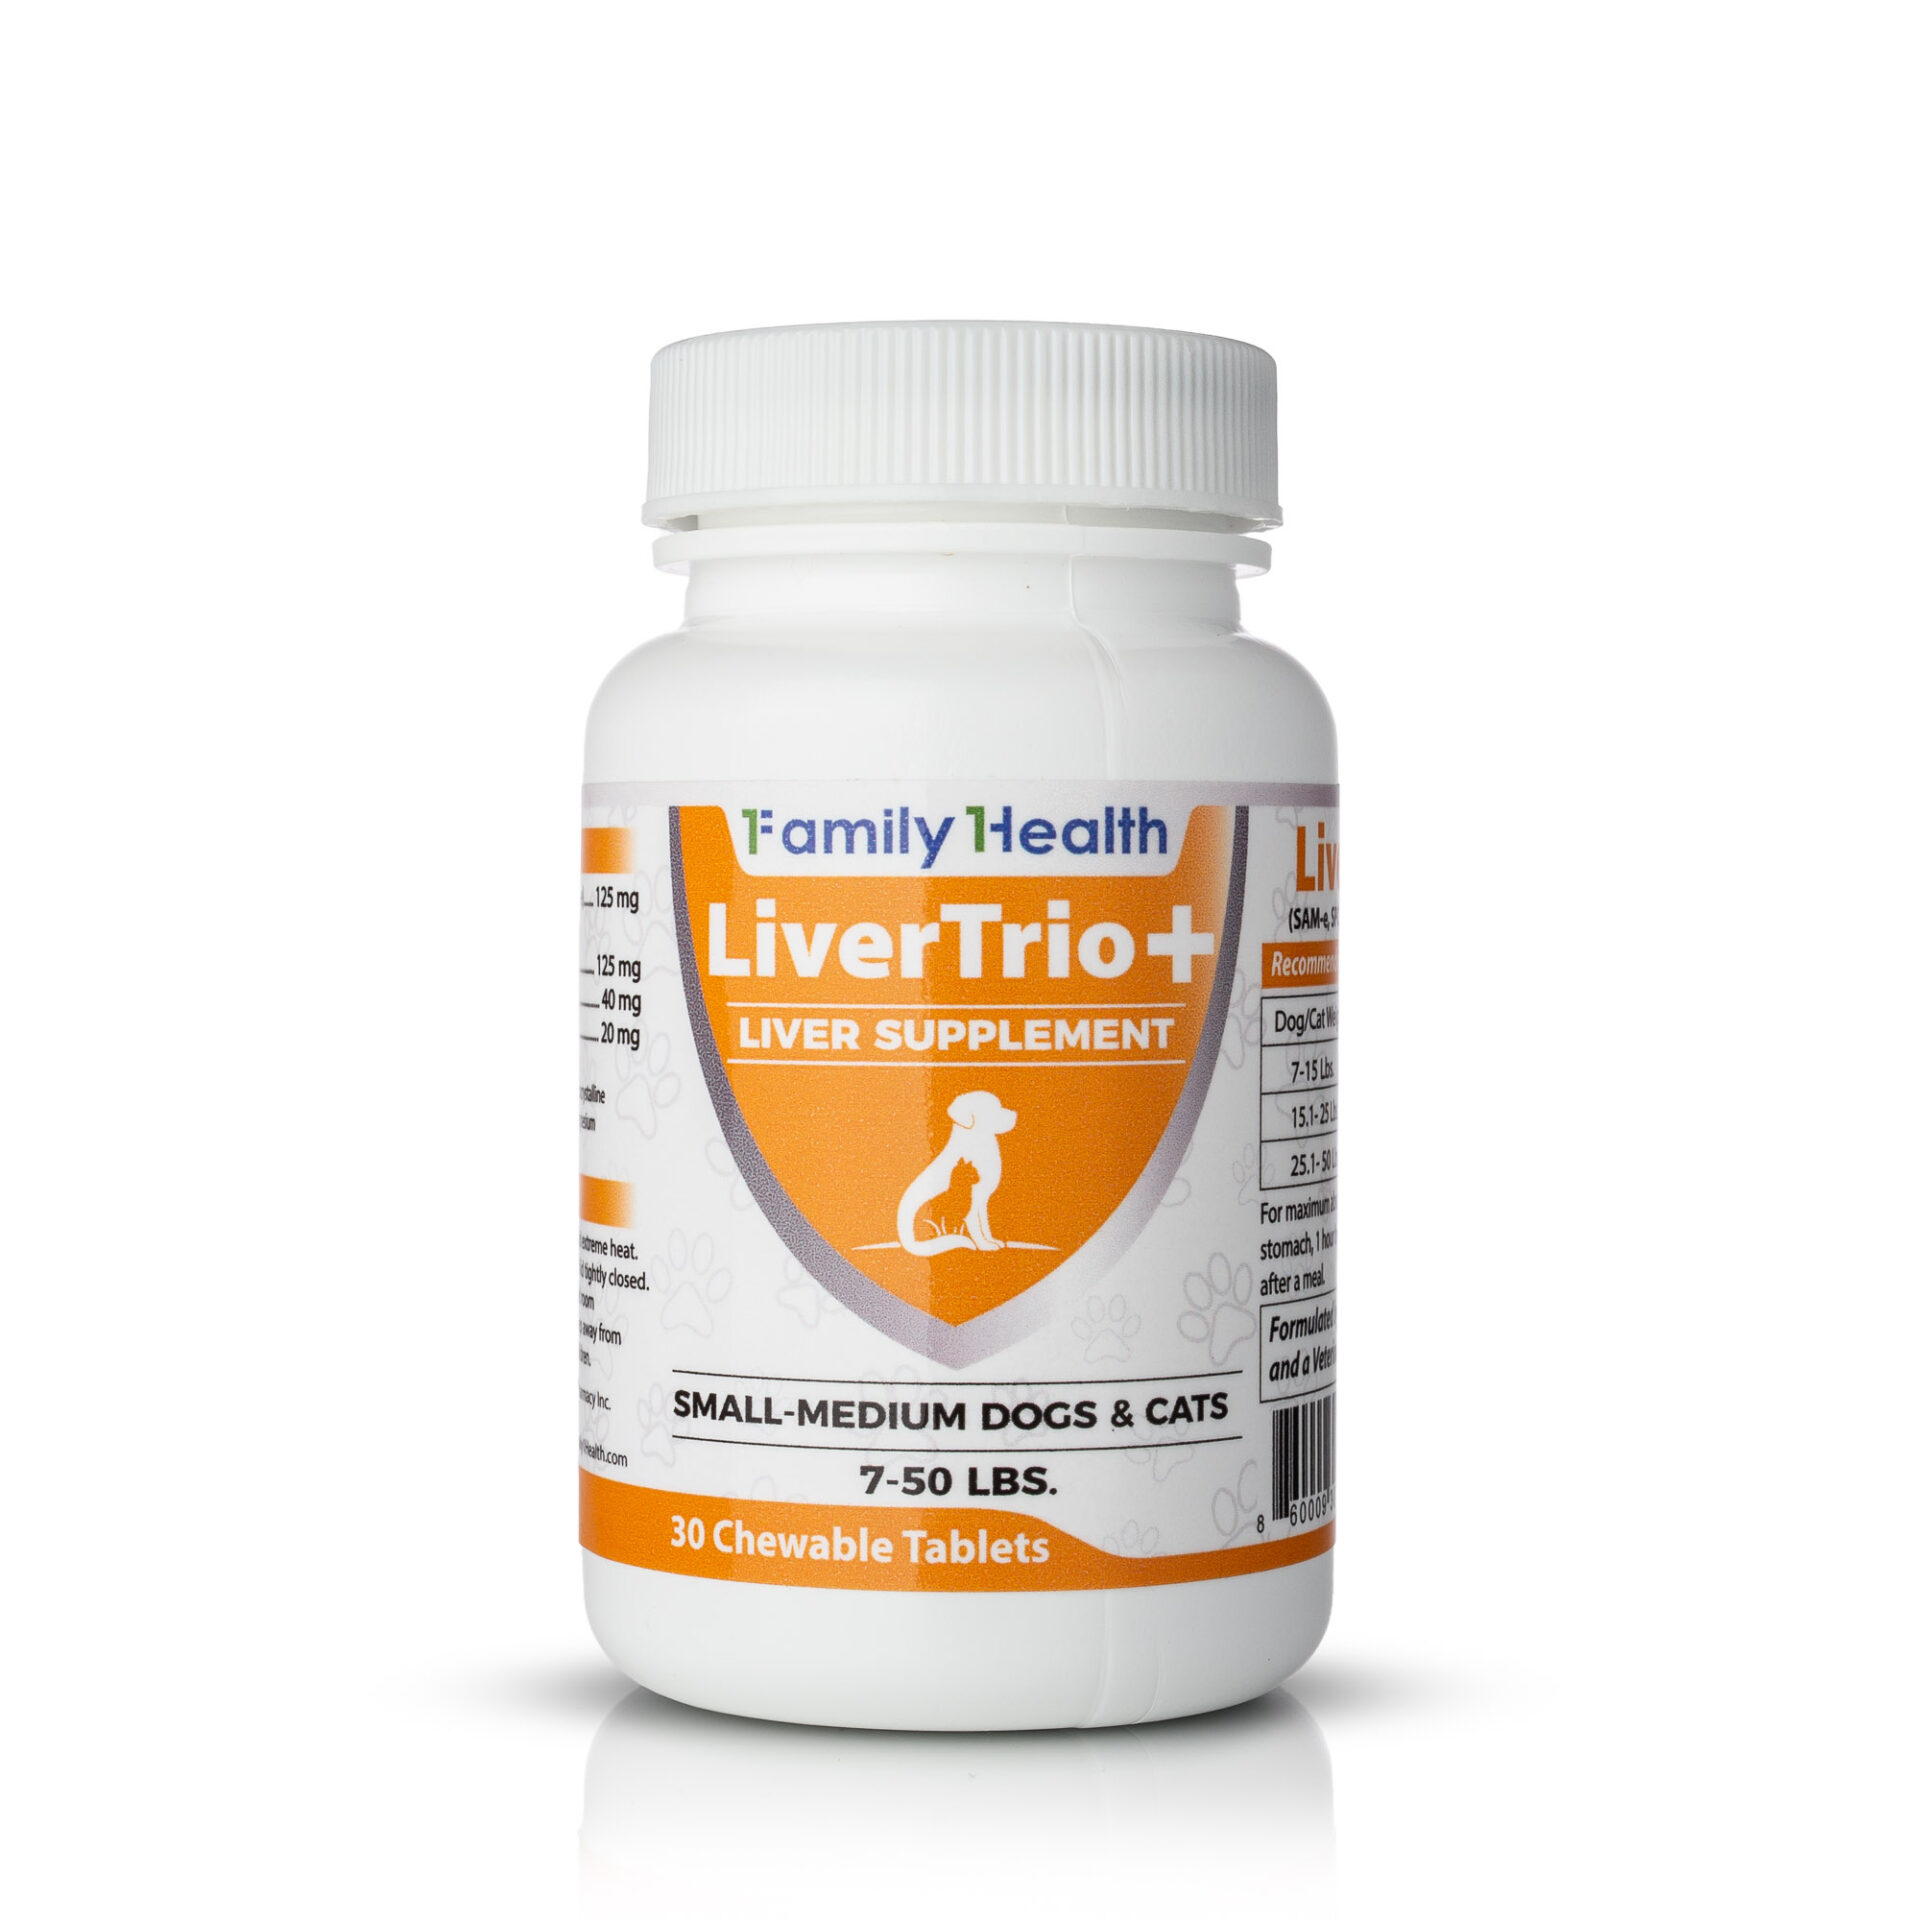 LiverTrio+ Liver Supplement Chew Tabs Cats & Small Dogs